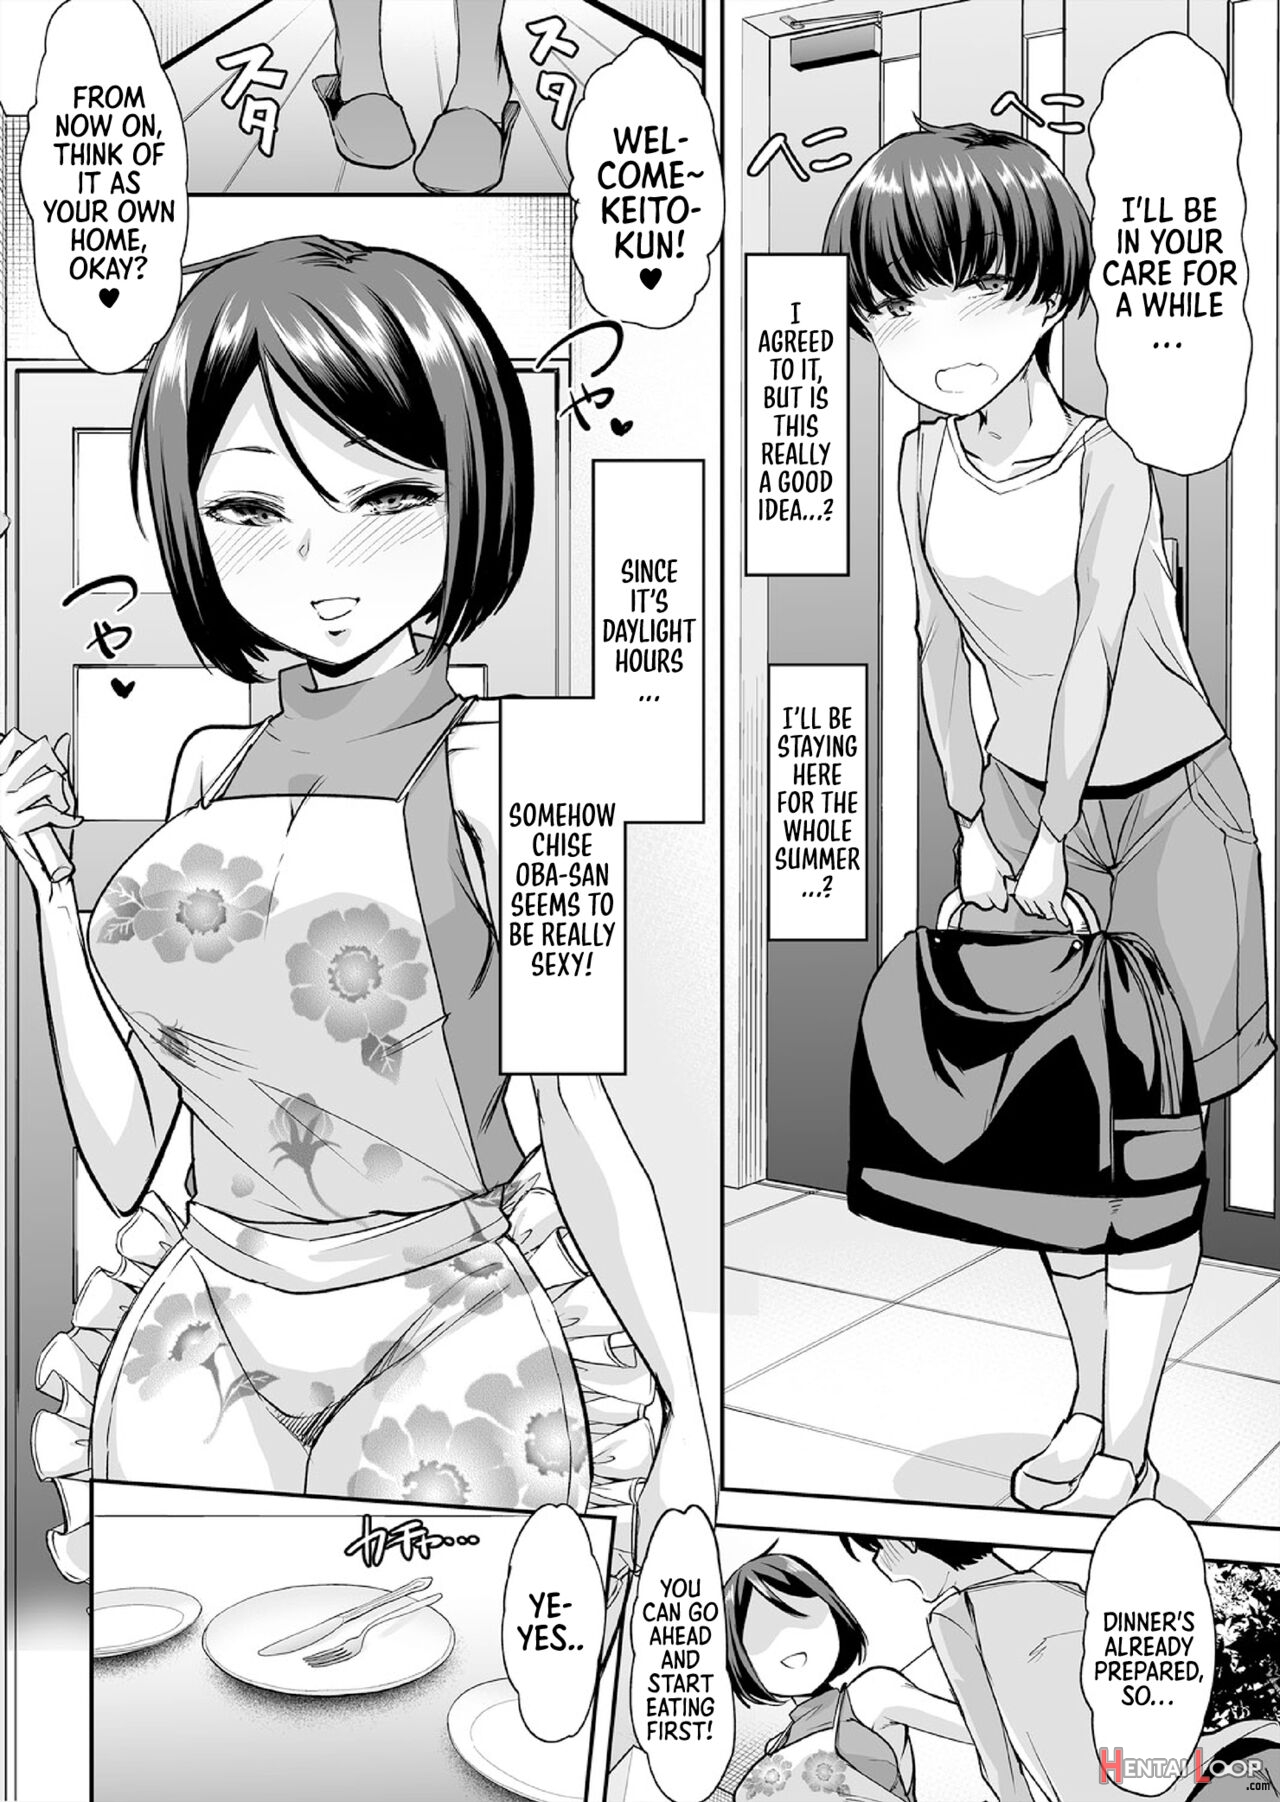 Sex With My Friends Mom - Page 3 of Fuck-buddy Mom â€” I Have Sex With My Friend's Mom Part 1 (by Goya)  - Hentai doujinshi for free at HentaiLoop